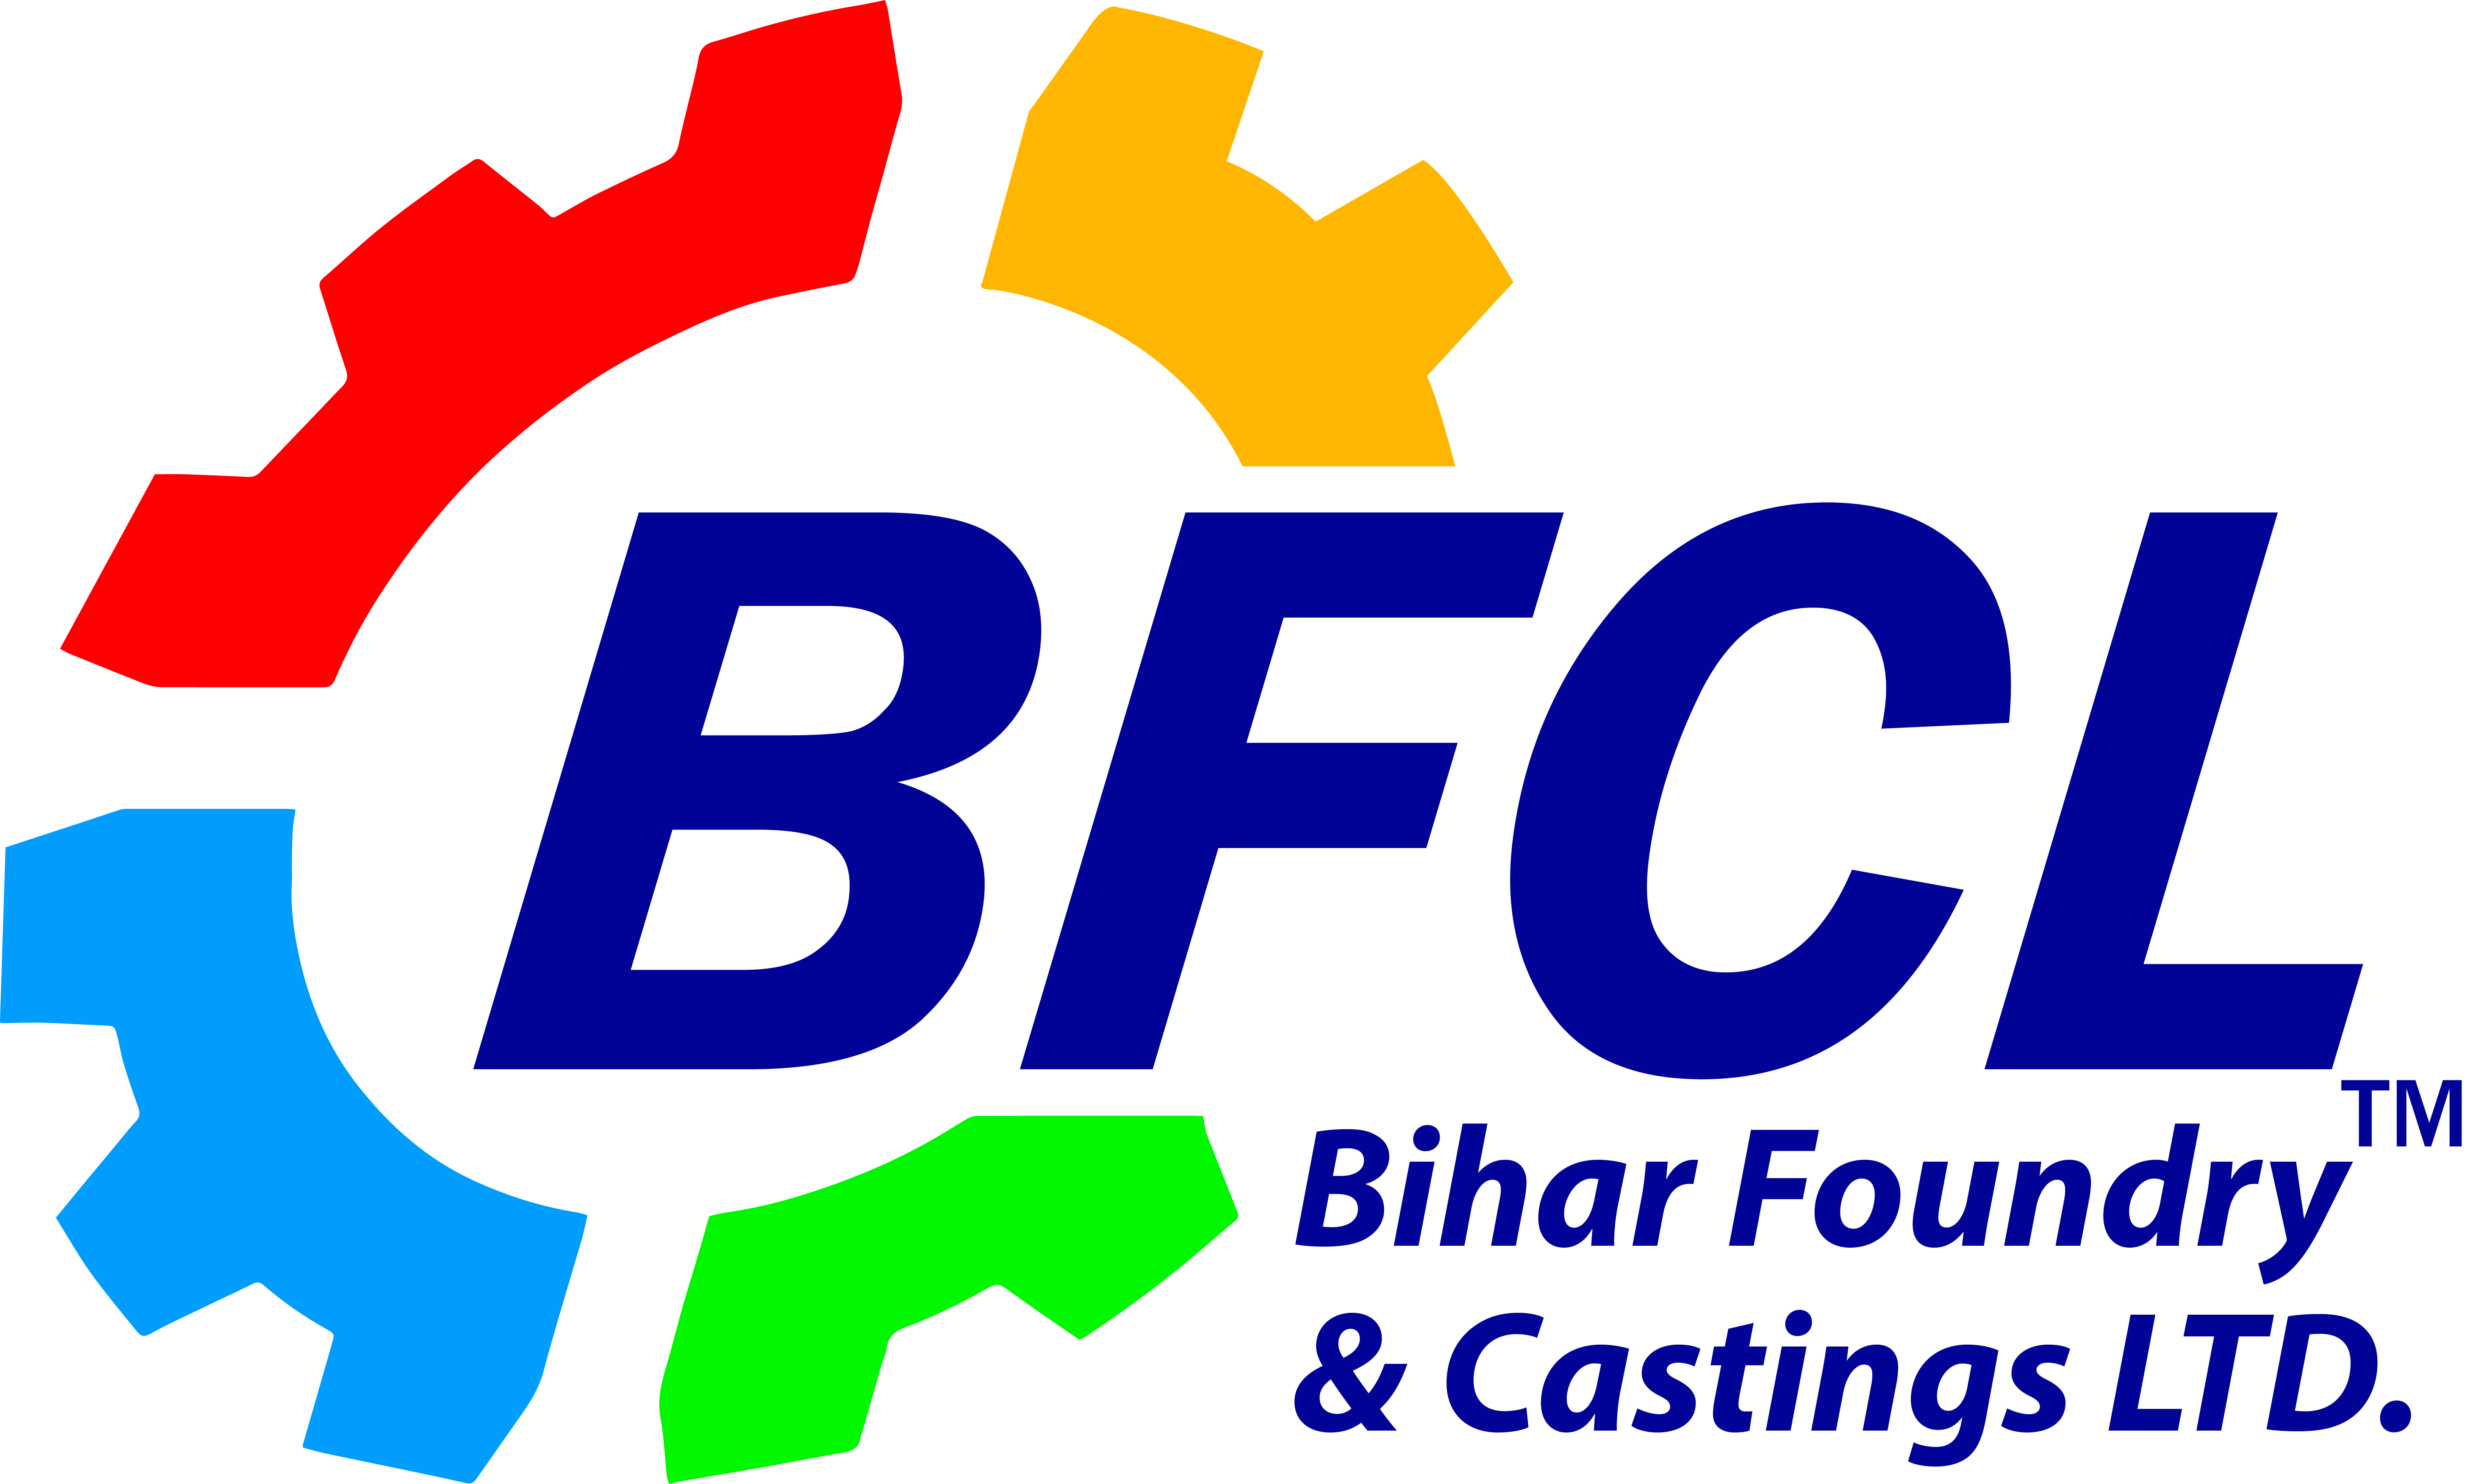 Bihar Foundry and Castings 